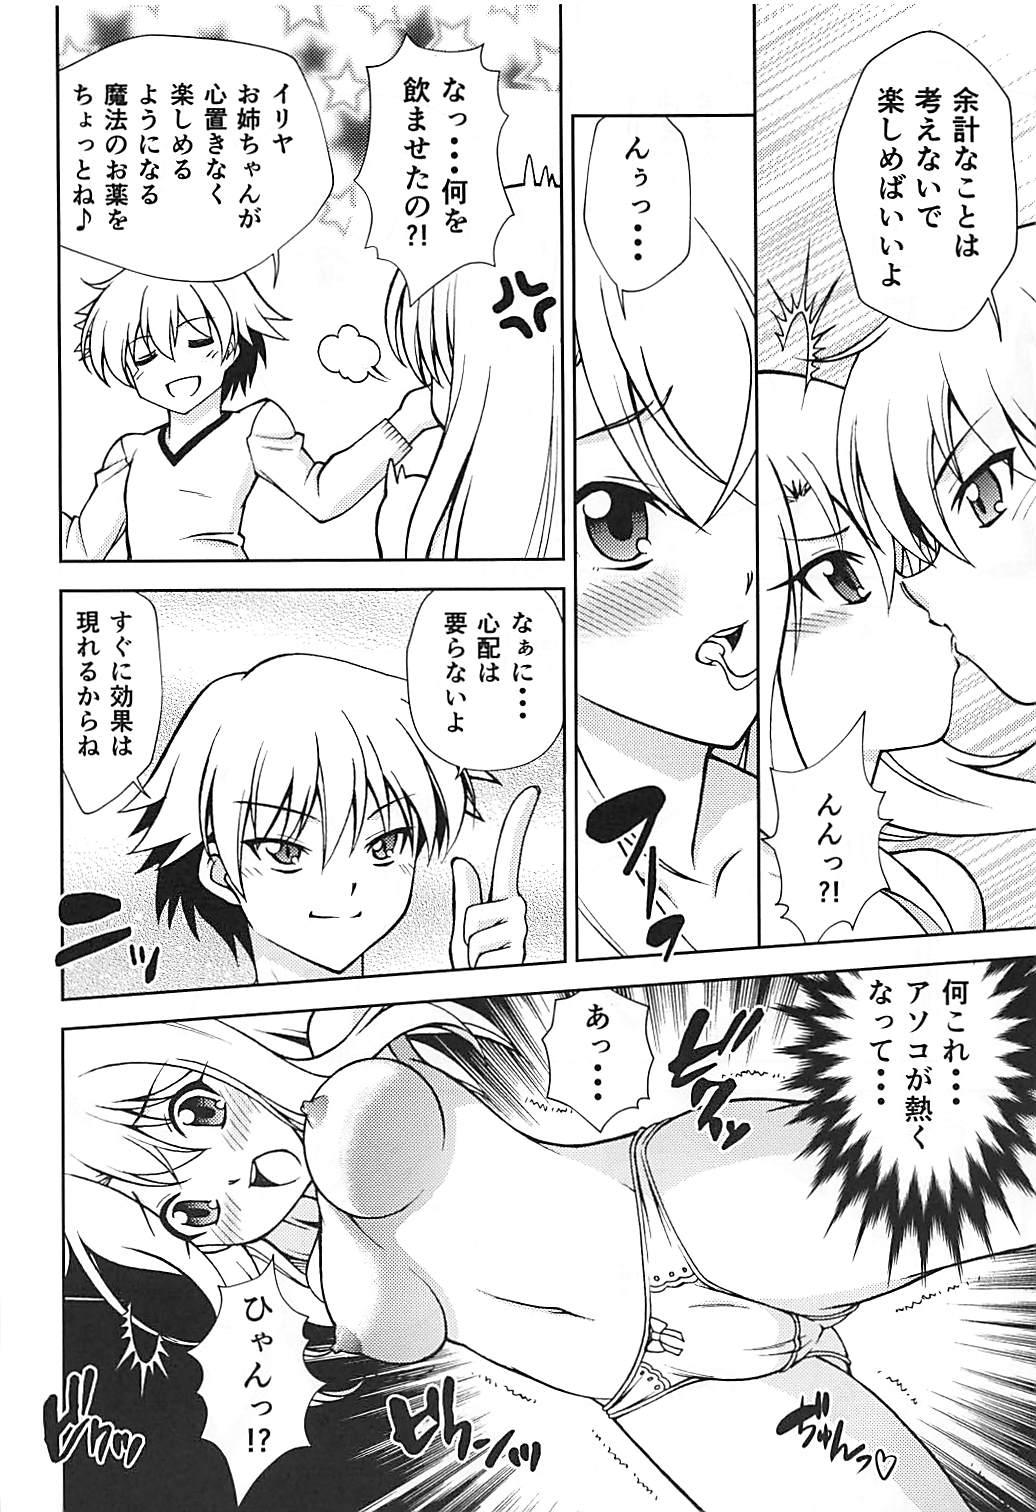 Publico PRISMA FLASH - Fate kaleid liner prisma illya Young Tits - Page 7